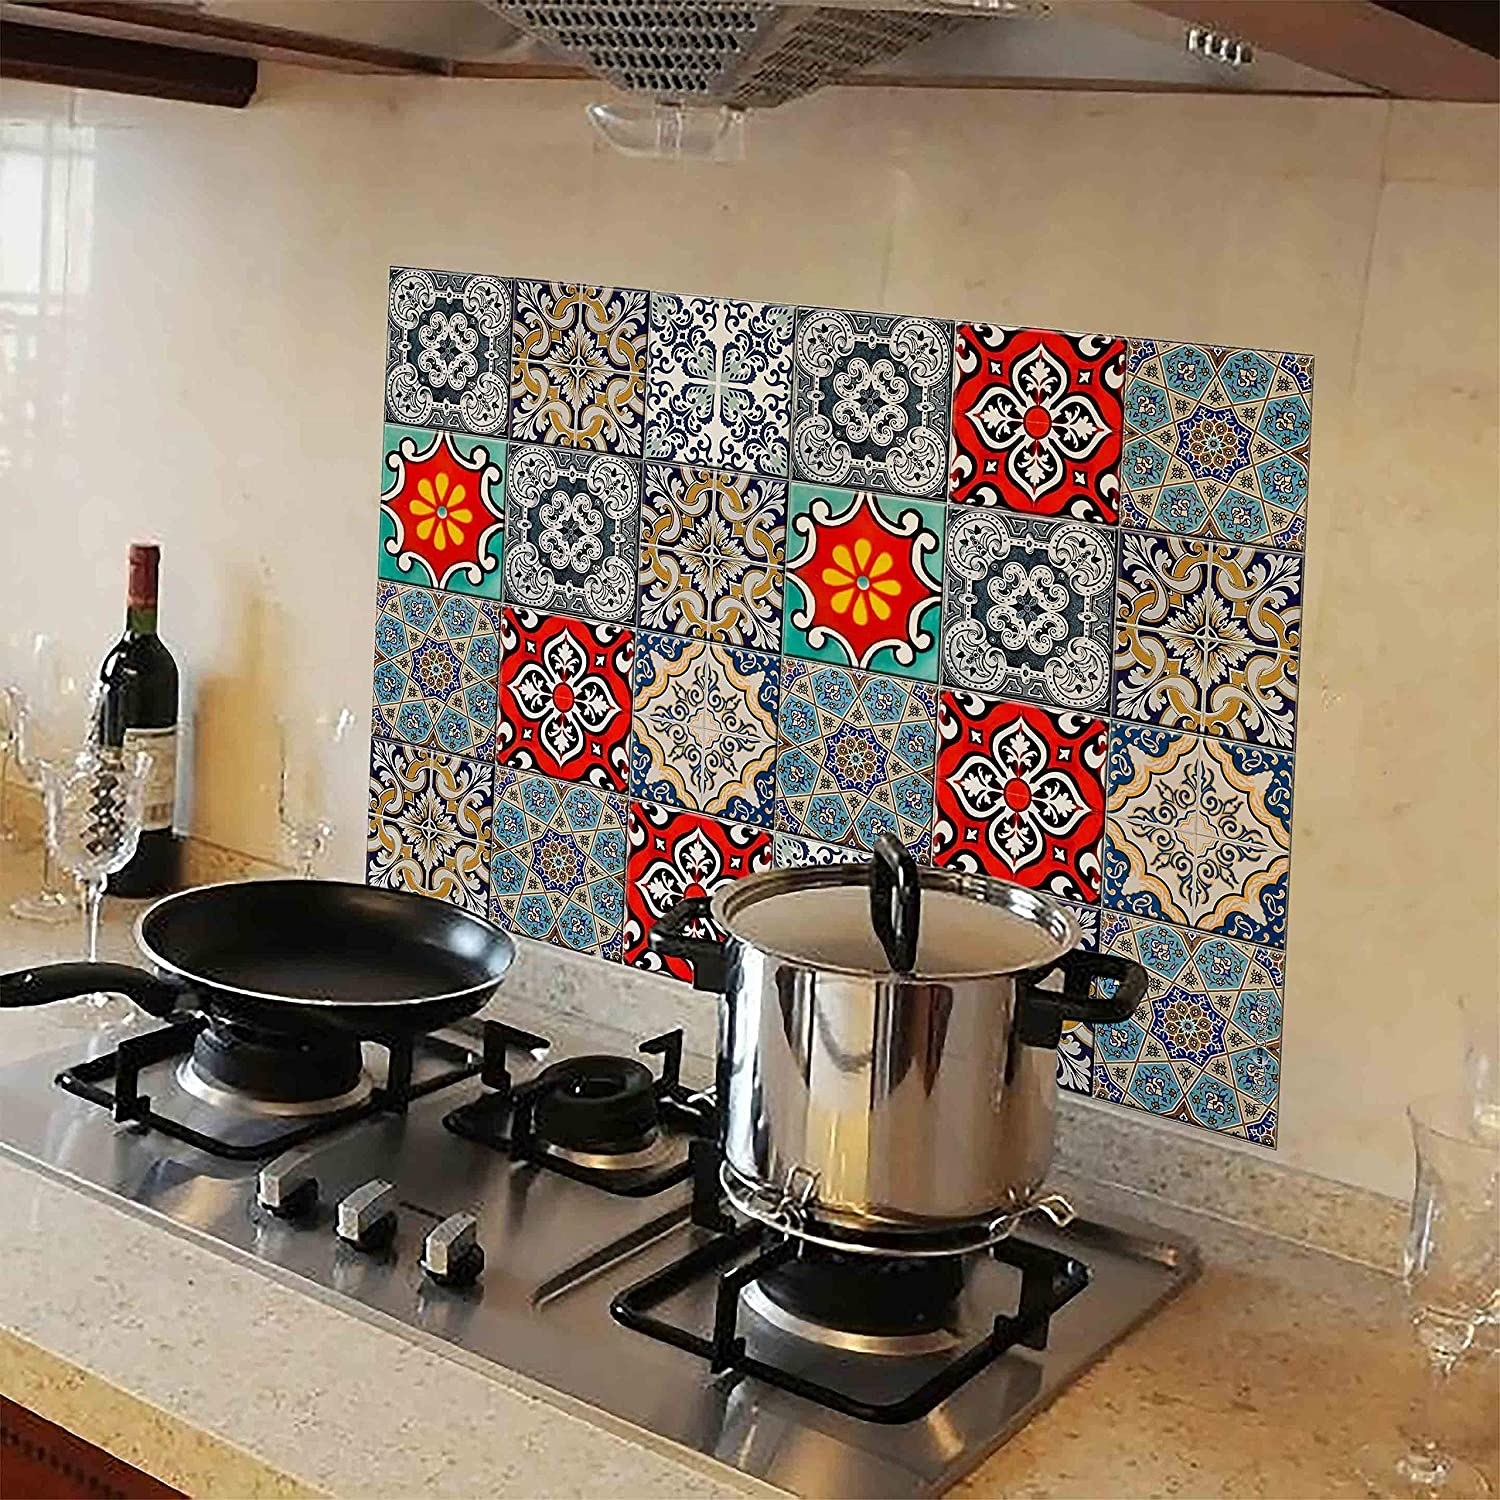 PVC tile stickers behind a stove top